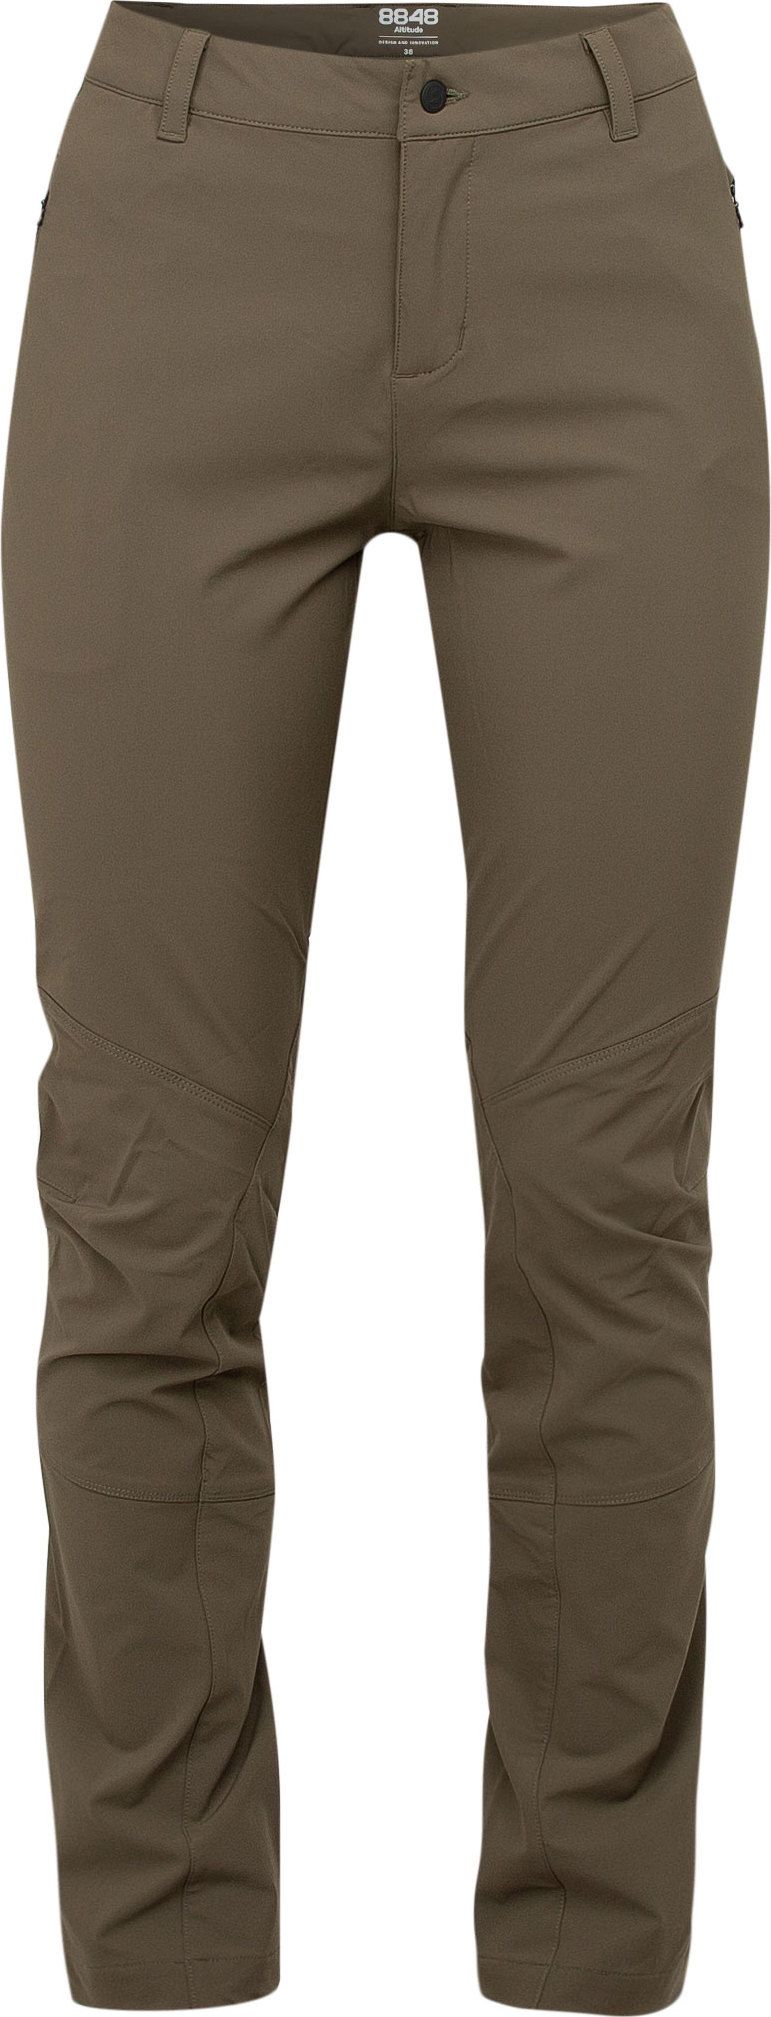 Women's Thorn Pant Turtle